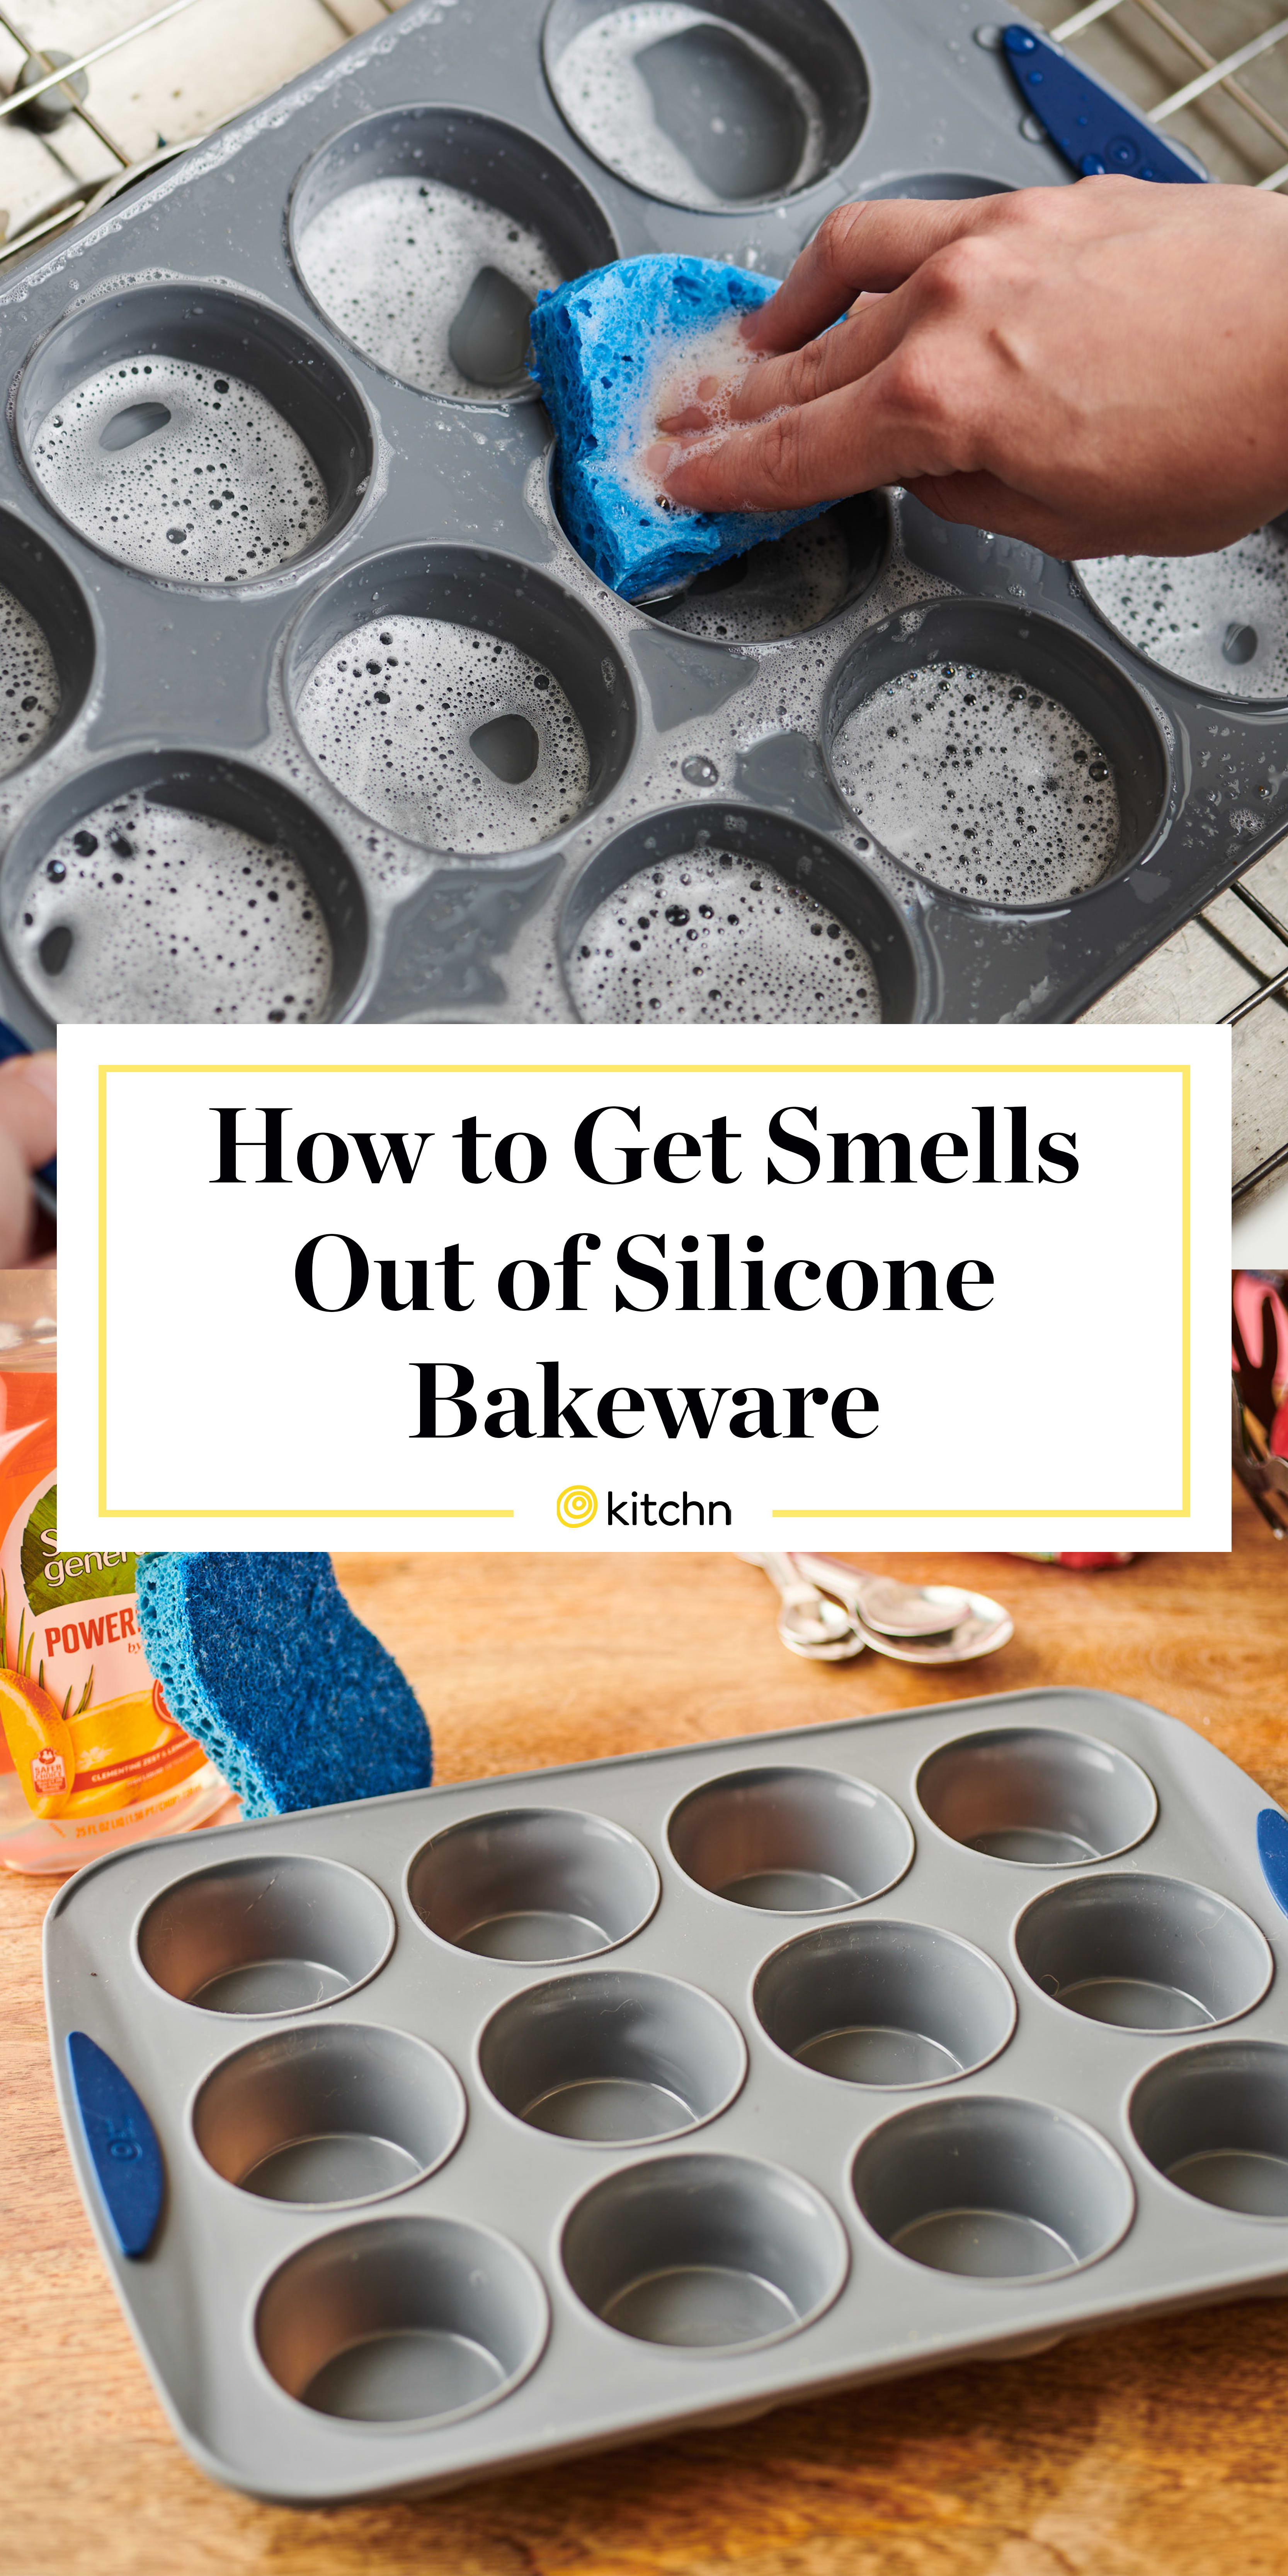 https://cdn.apartmenttherapy.info/image/upload/v1588713363/k/Photo/Lifestyle/2020-05-How-to-Get-Lingering-Smells-Out-of-Silicone-Bakeware/HowtoGetSmellsoutofSiliconeBakeware-v2.jpg